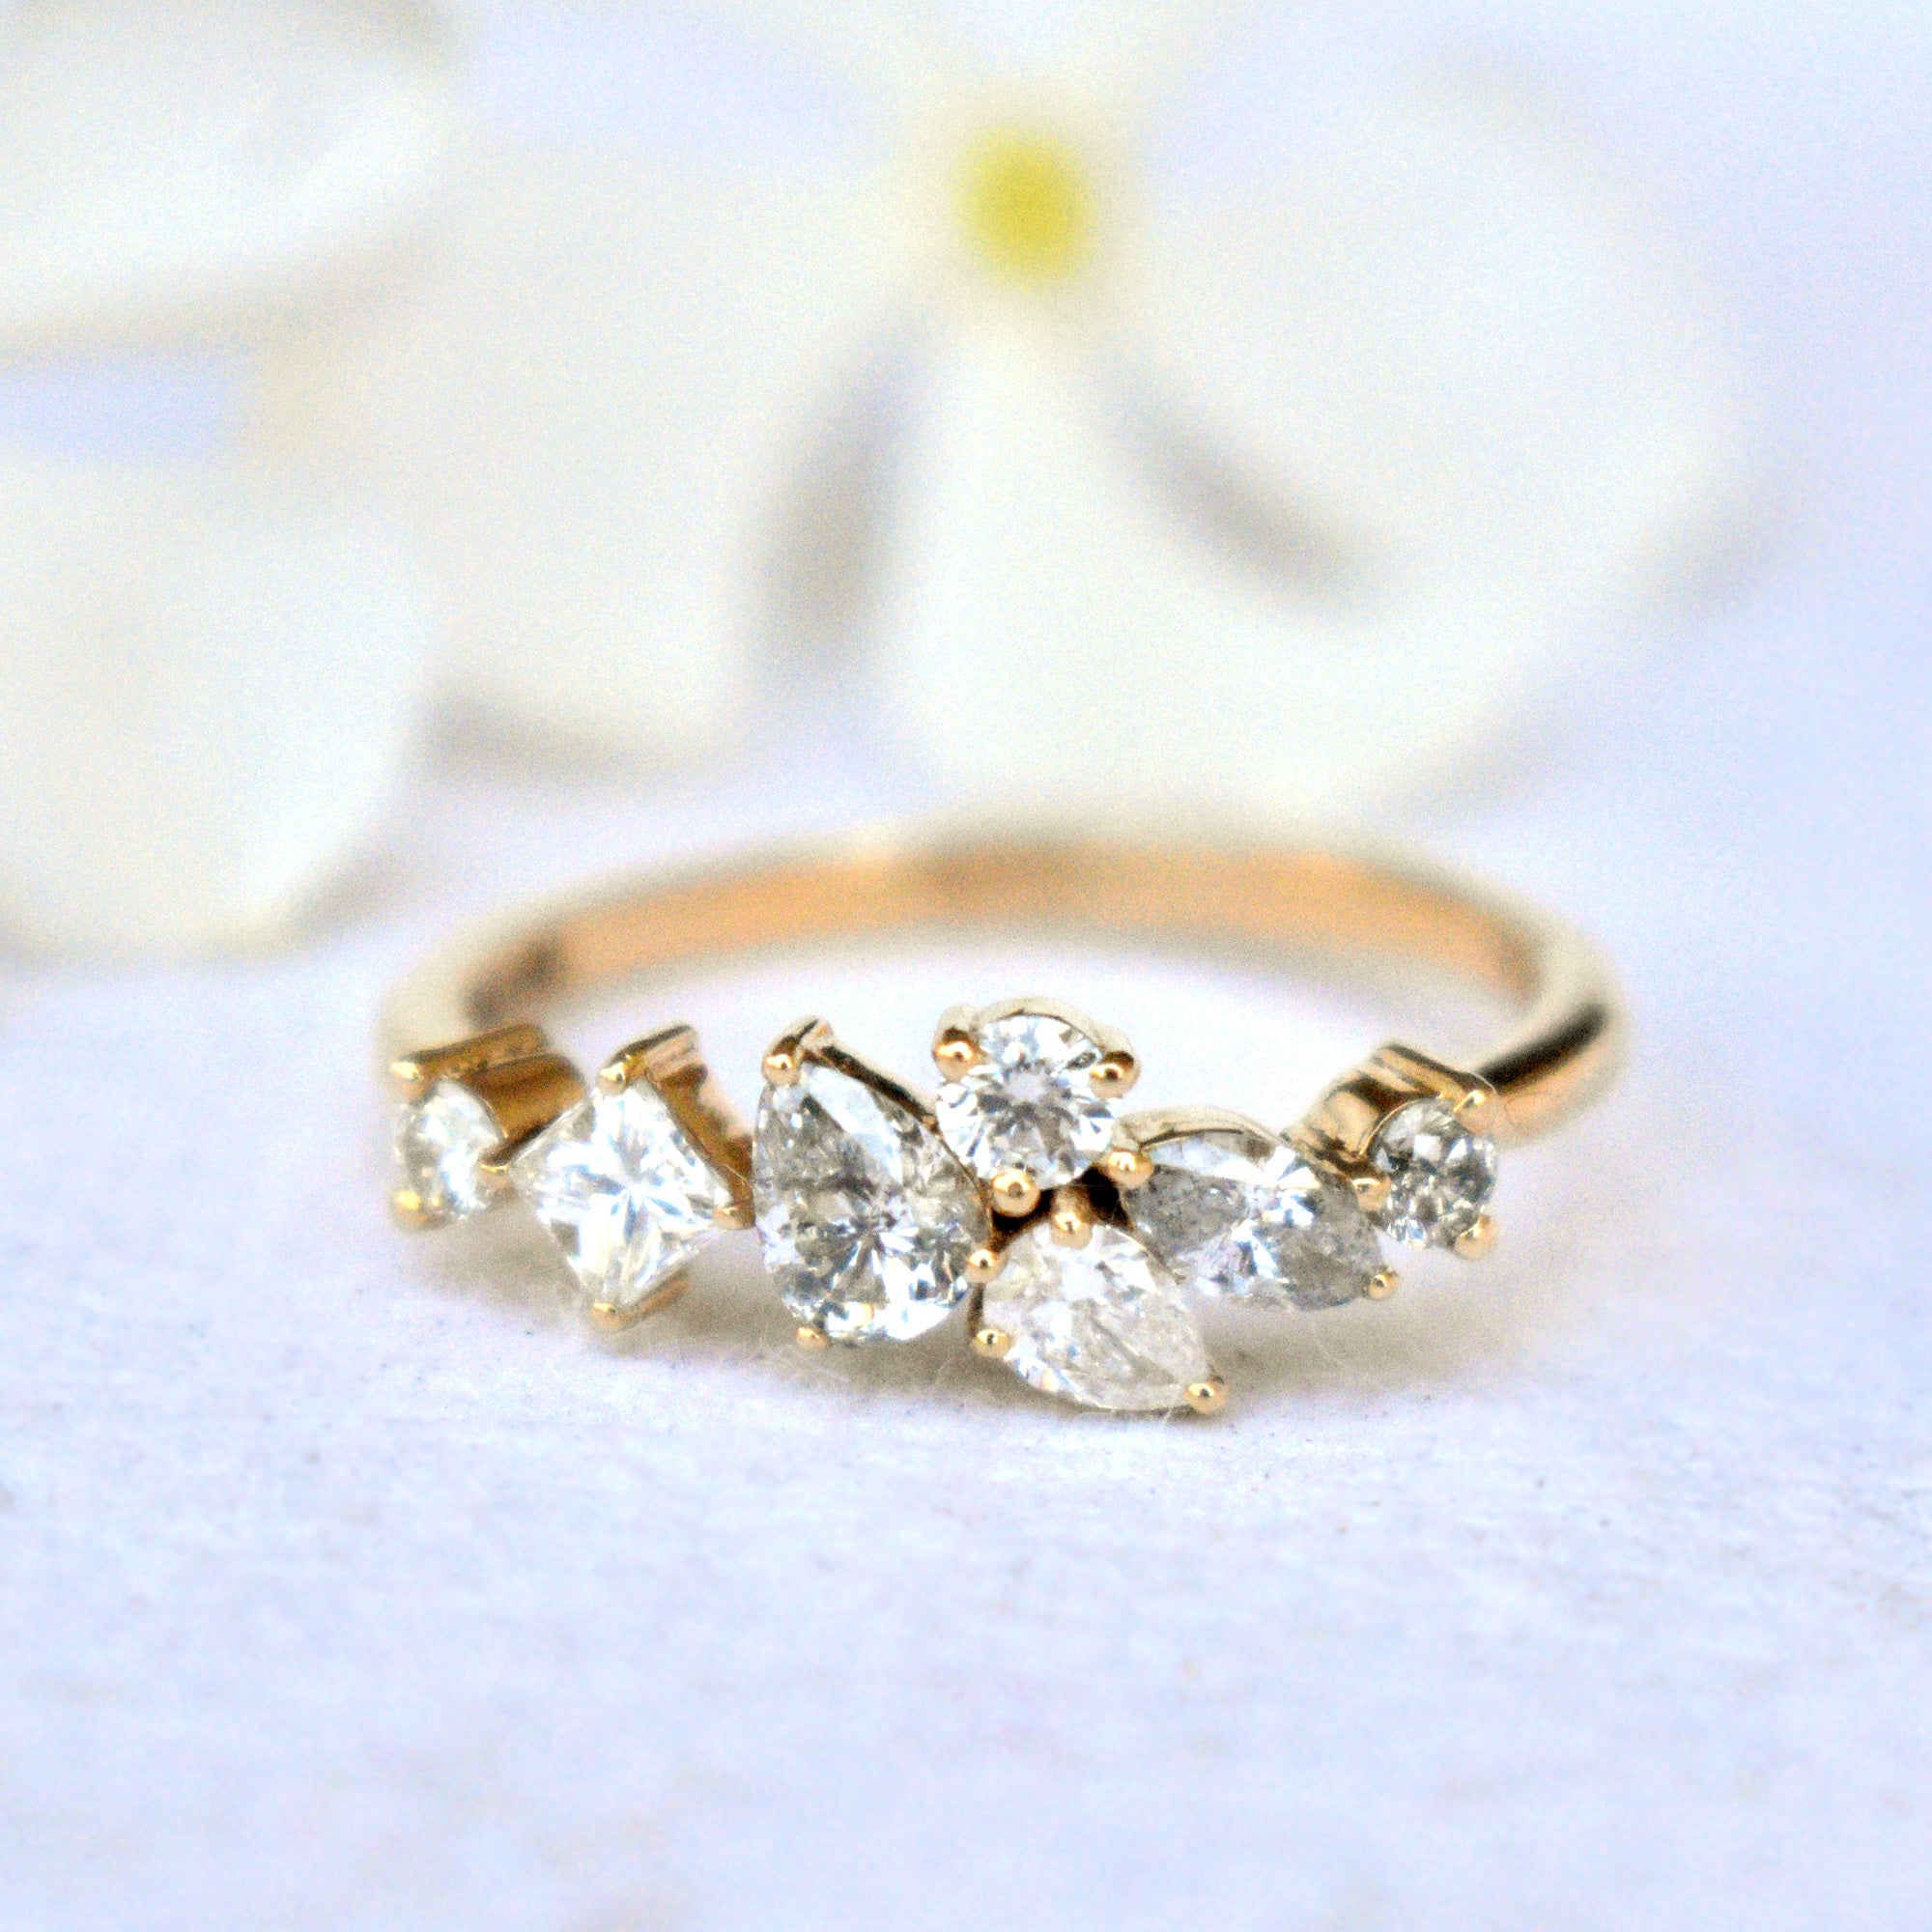 Multi Stone Asymmetric Cluster Ring in Solid Gold with Salt & Pepper and White Fancy Cut Diamonds